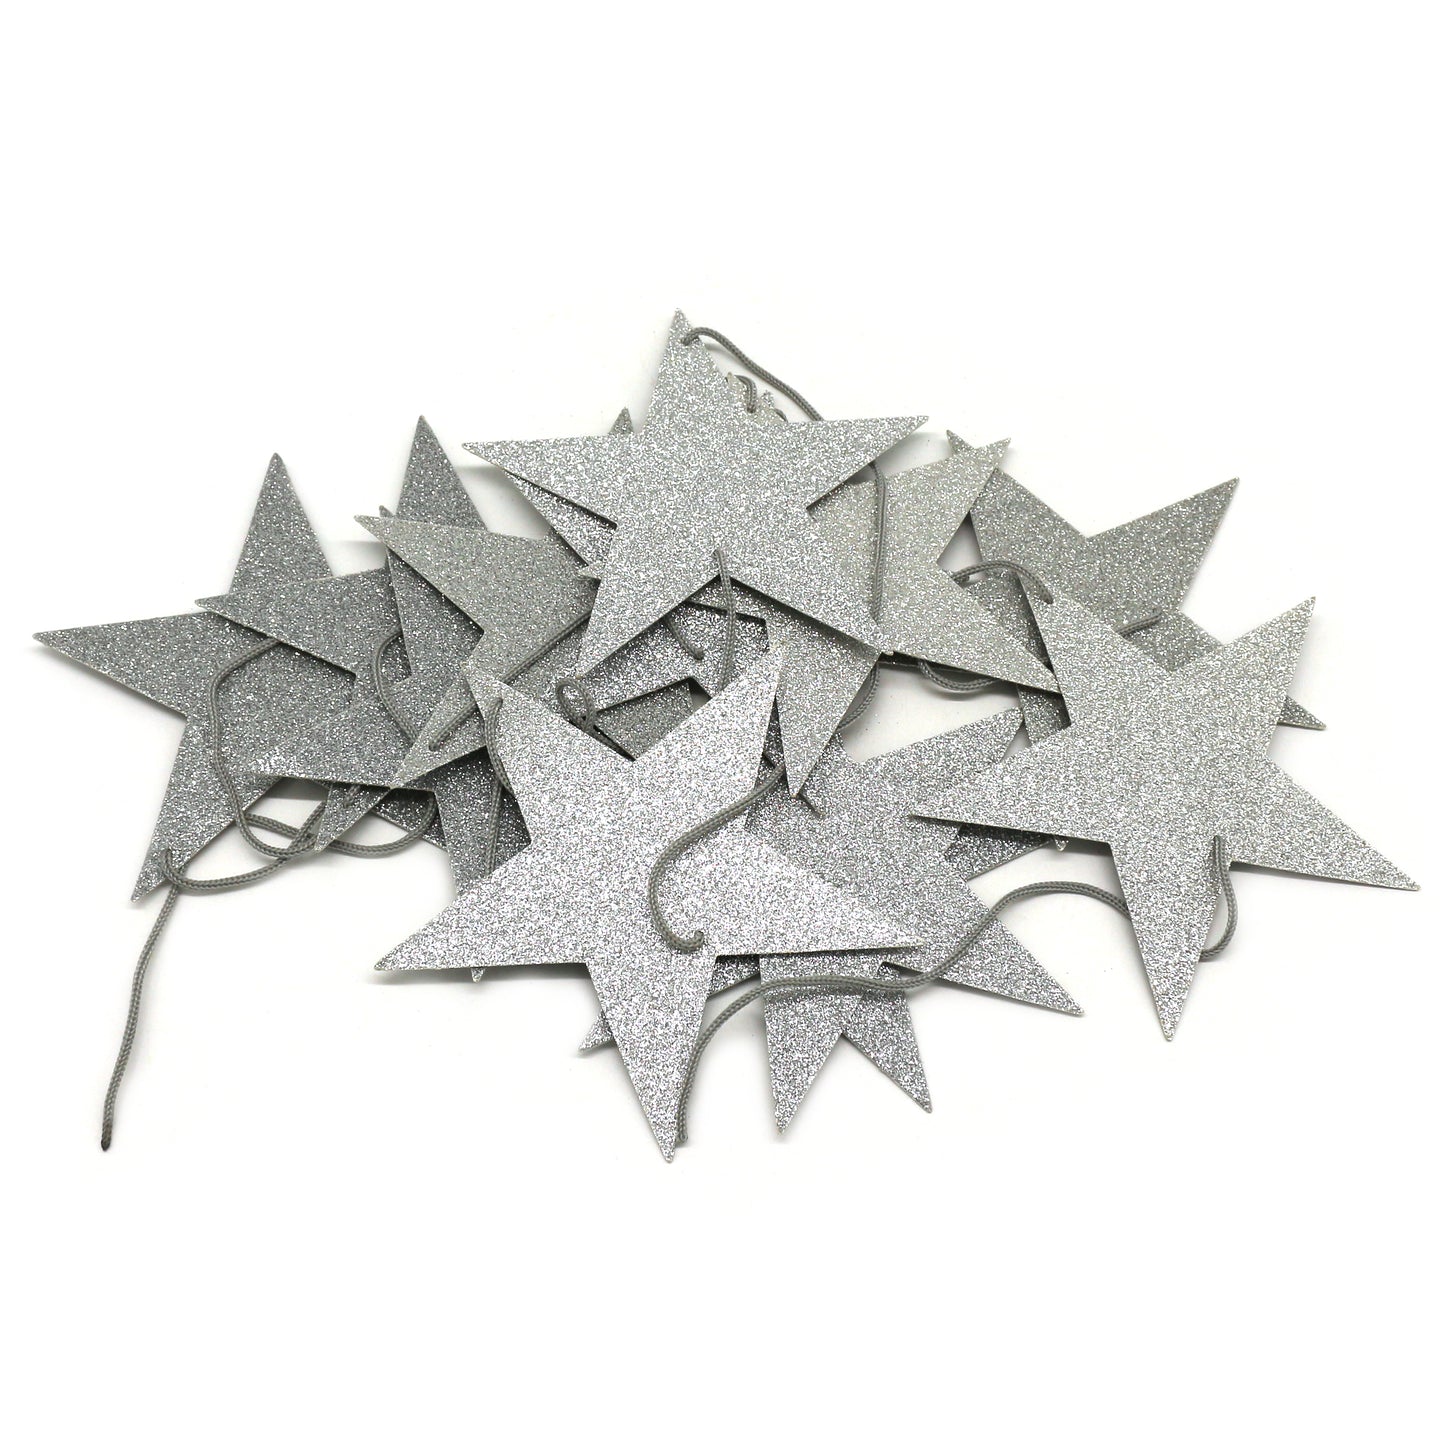 CVHOMEDECO. Silver Glittered Paper Star String Star Garland Hanging Décor for Wedding Birthday Party Festival Home Background Decorative, 8.2 feet, Pack of 2 PCS